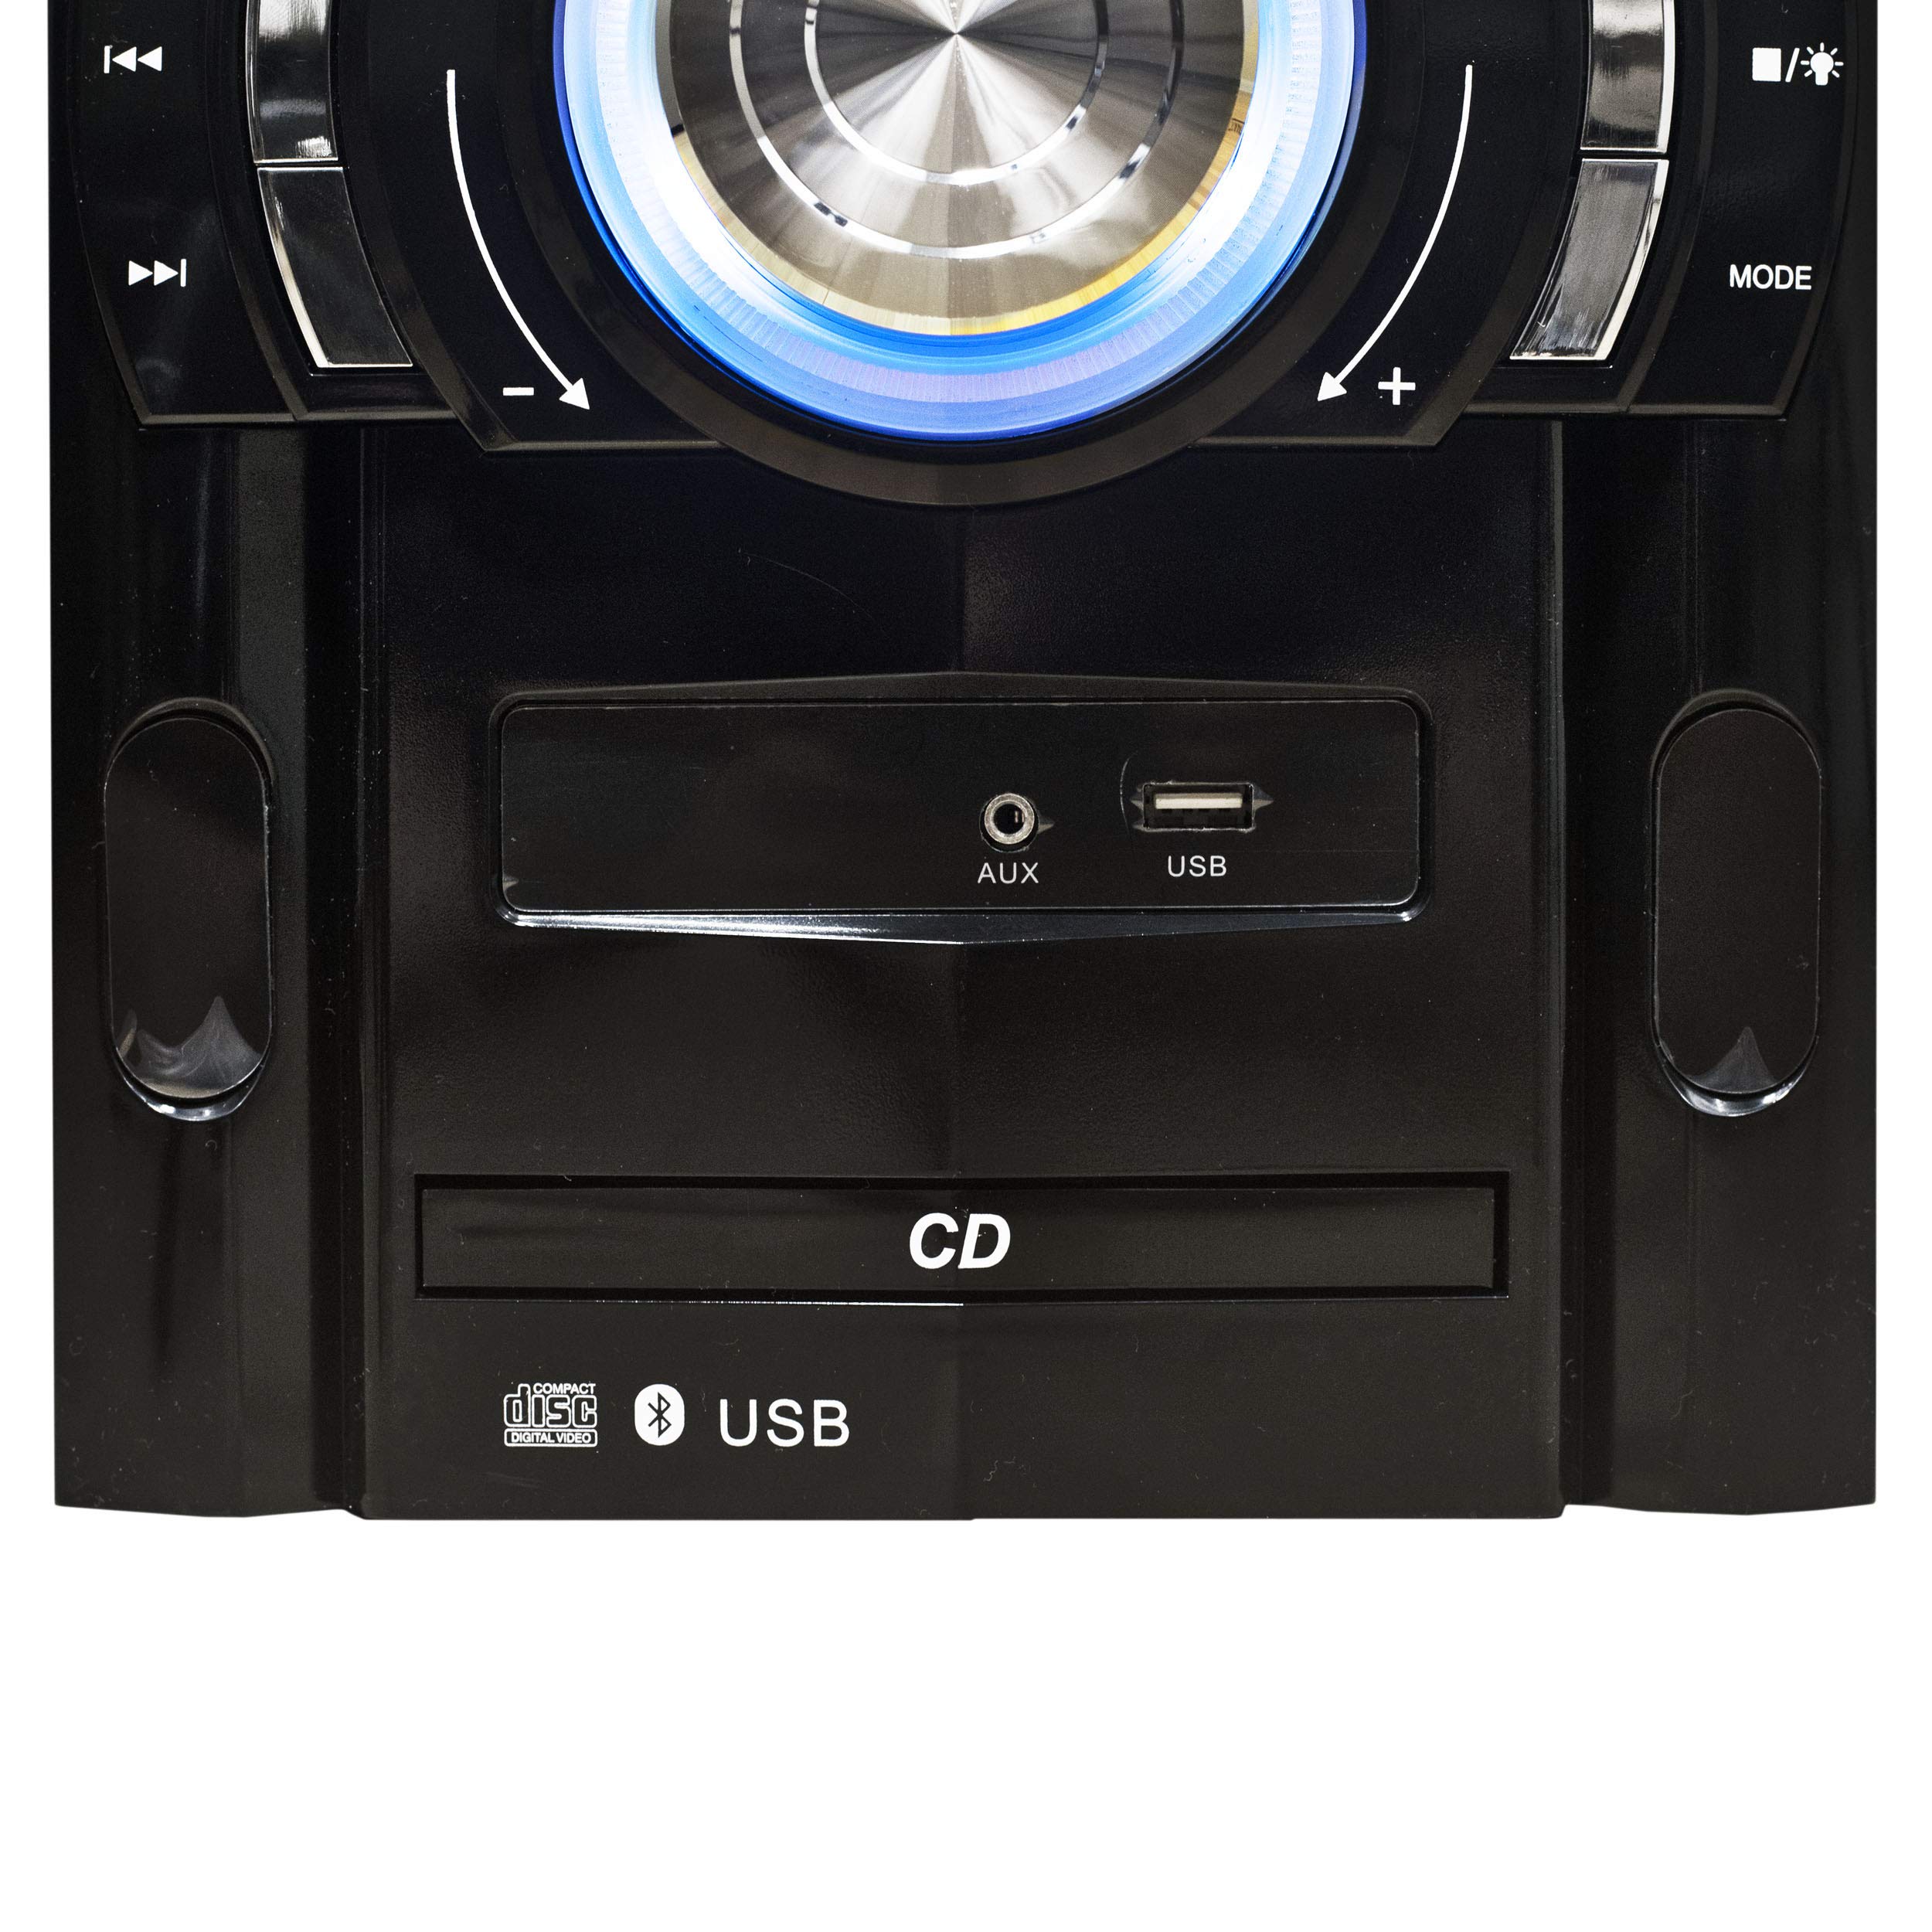 Magnavox MM440 3-Piece CD Shelf System with Digital PLL FM Stereo Radio, Bluetooth Wireless Technology, and Remote Control in Black | Blue Colored Lights | LED Display | AUX Port Compatible |